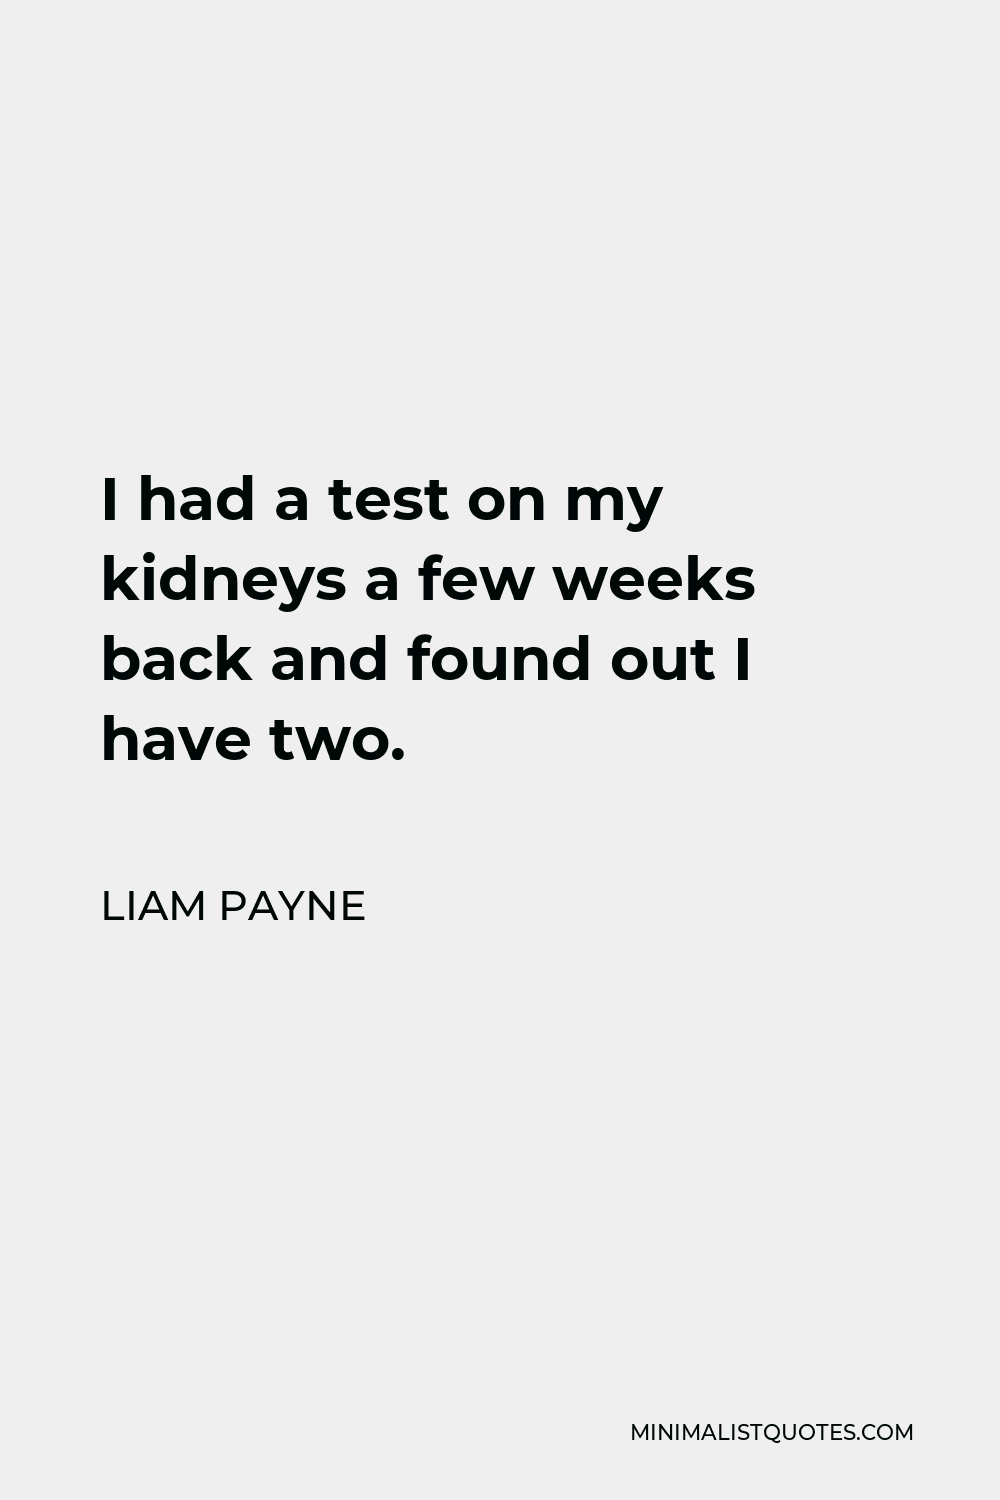 Liam Payne Quote - I had a test on my kidneys a few weeks back and found out I have two.